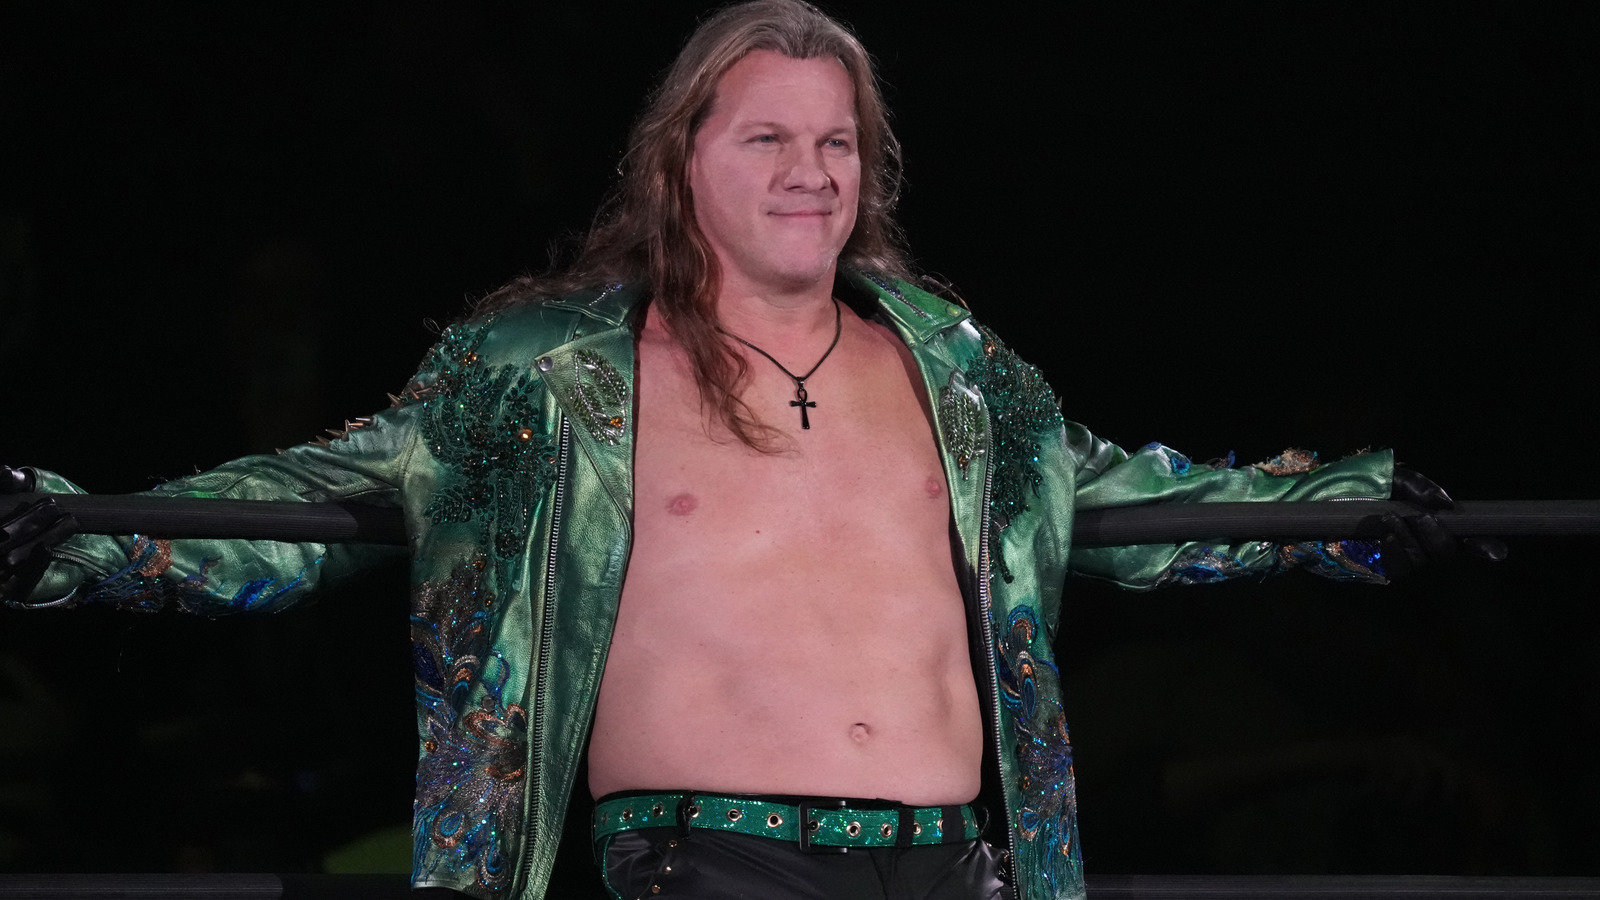 Report: WWE Performer Knocked Out AEW's Chris Jericho In 2020 Cruise Ship Altercation